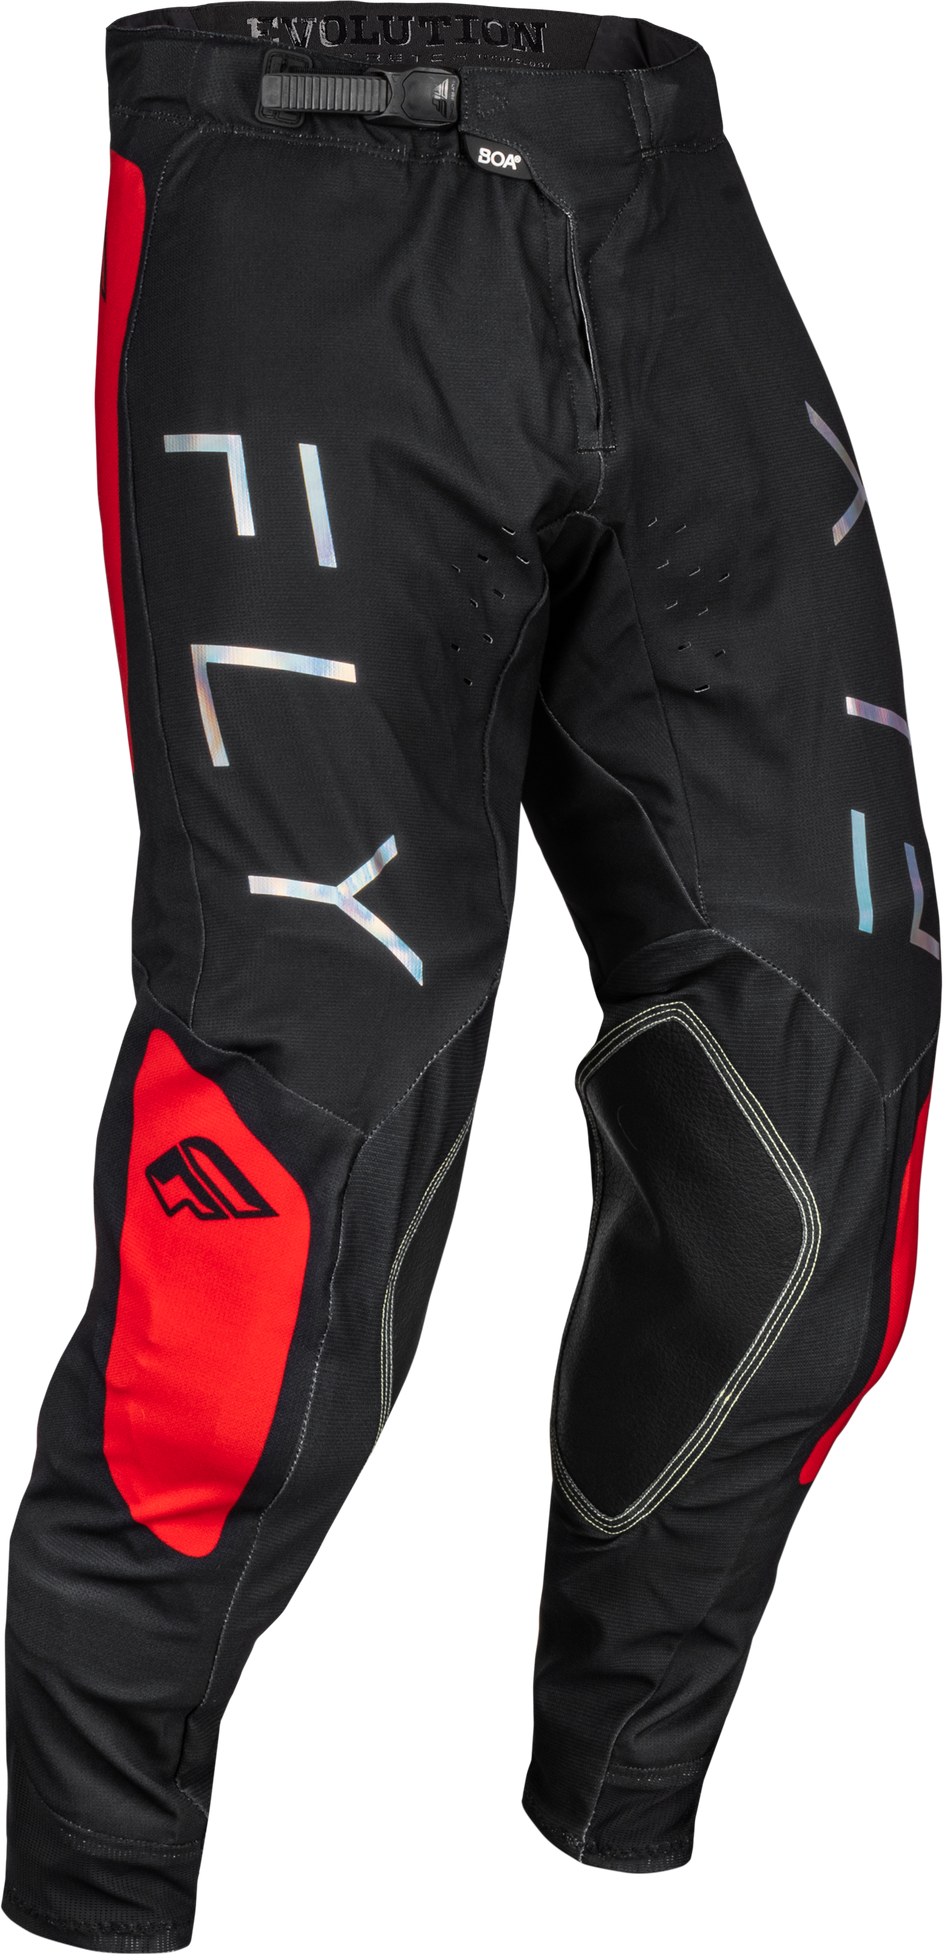 FLY RACING Evolution Dst Pants Black/Red Sz 30 377-13030